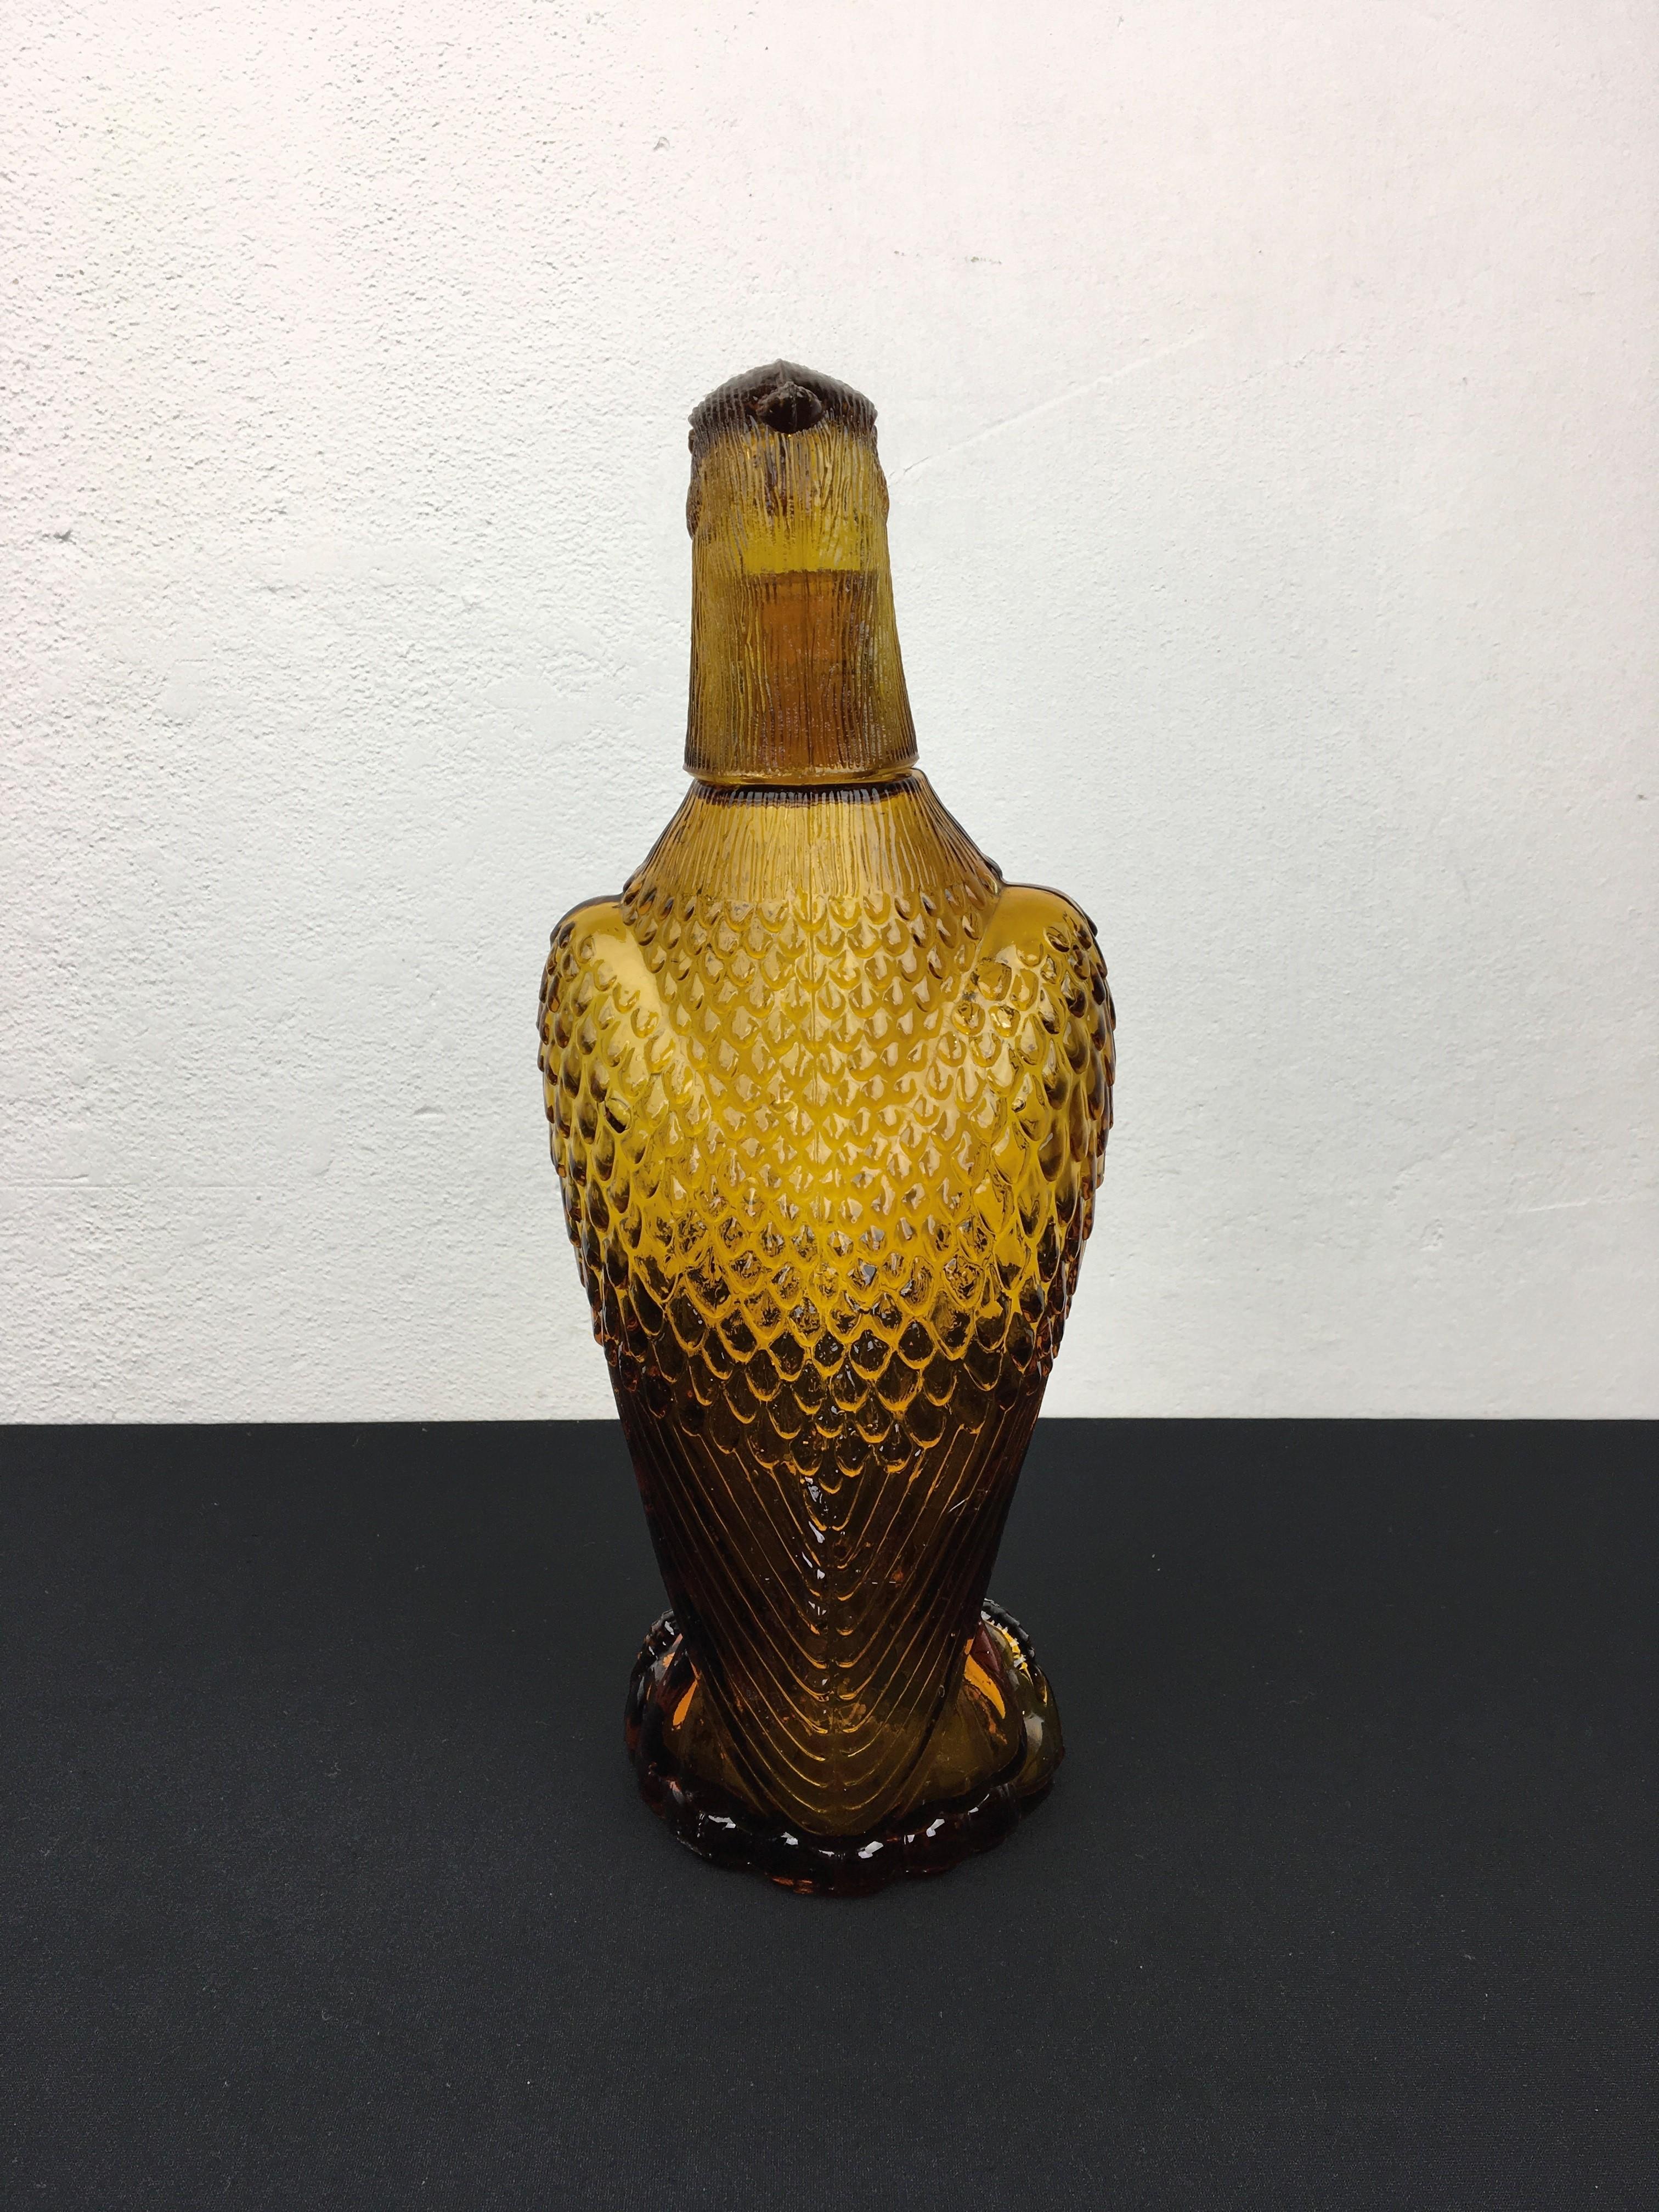 Amber Glass Eagle Bottle or Decanter, Empoli Style 1